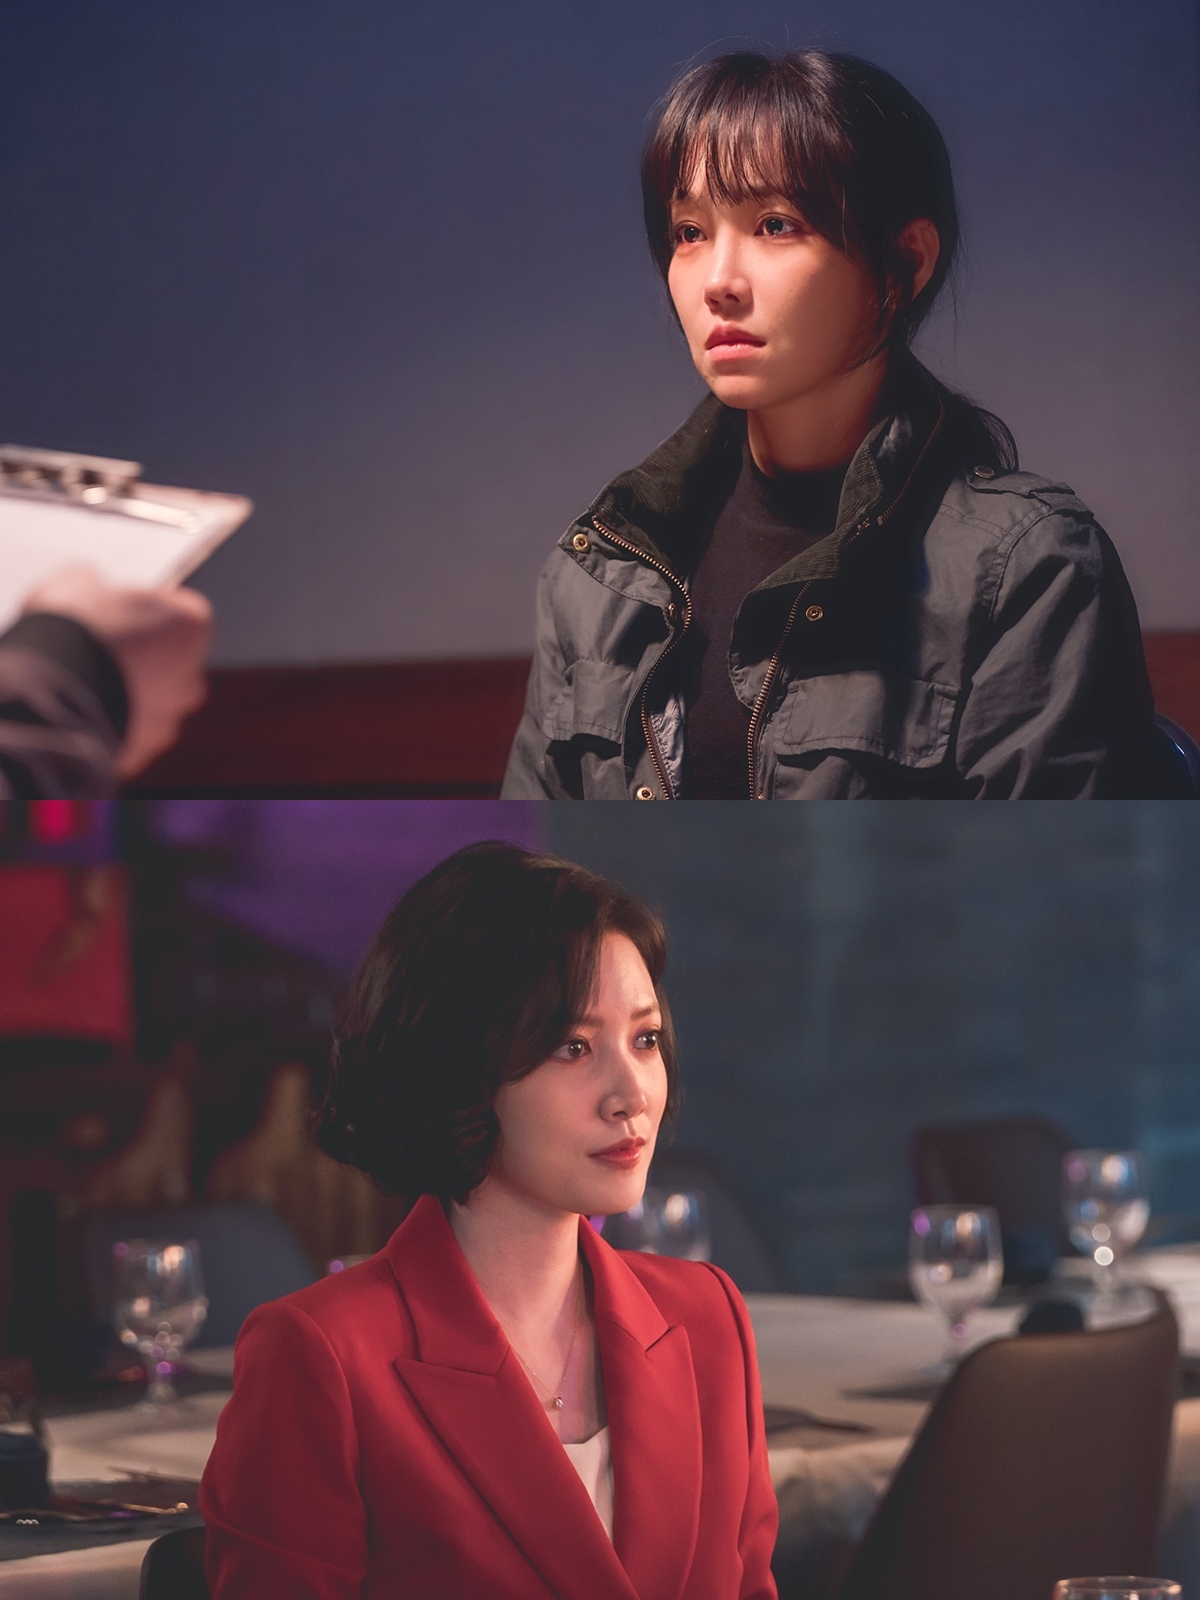 Lee Yoo-ri and Lim Ju-eun fiercely confront over love as a woman and love as Mother.Lee Yoo-ri and Lim Ju-eun will play the role of Ji Eun-soo and Semino Rossi respectively in Channel A new gilt Jackson Liar of Lies ahead of the first broadcast at 10:50 pm on the 4th.Lee Yoo-ri was once a daughter-in-law of a conglomerate, but at a moment he became a Husband killer and lost his only pro-Daughter and fell into hell.Silver Semino Rossi (Lim Ju-eun) is a smart and capable agent who seems to be unsavory but hides the pain that can not be said in his heart.The two are tied up with Yeon Jung-hoon and will bring a tense tension to the drama.Ji Eun-soo gradually gets closer by continuing his unexpected relationship with Kang Ji-Min (Yeon Jung-hoon).Semino Rossi is the ex-wife of Kang Ji-Min, and after the divorce, he is left with a fuss and shakes his mind.In addition, they show a confrontation without a backdrop even with the only Daughter rainfall (Kon Na-hee) of Kang Ji-Min.As a woman, and as a mother, the conflict between Kang Ji-Min and those who want to keep the side of Kang Woo-ju is prominent in the play and leads to an exciting development.Meanwhile, the Lie of Lies is a suspense melodge from a woman who started lying about her life to get back to her pro-Daughter.In addition to the development of a suction story and sweating hands, Lee Yoo-ri, Yeon Jung-hoon, Lee Il-hwa, Lim Ju-eun, and Kwon Hwa-woon will join the audience with explosive synergy.Channel As new Lamar Jackson Lies will be broadcast on Channel A at 10:50 p.m. on the 4th, and will also be released online exclusively on OTT platform waves.Photo = Channel A